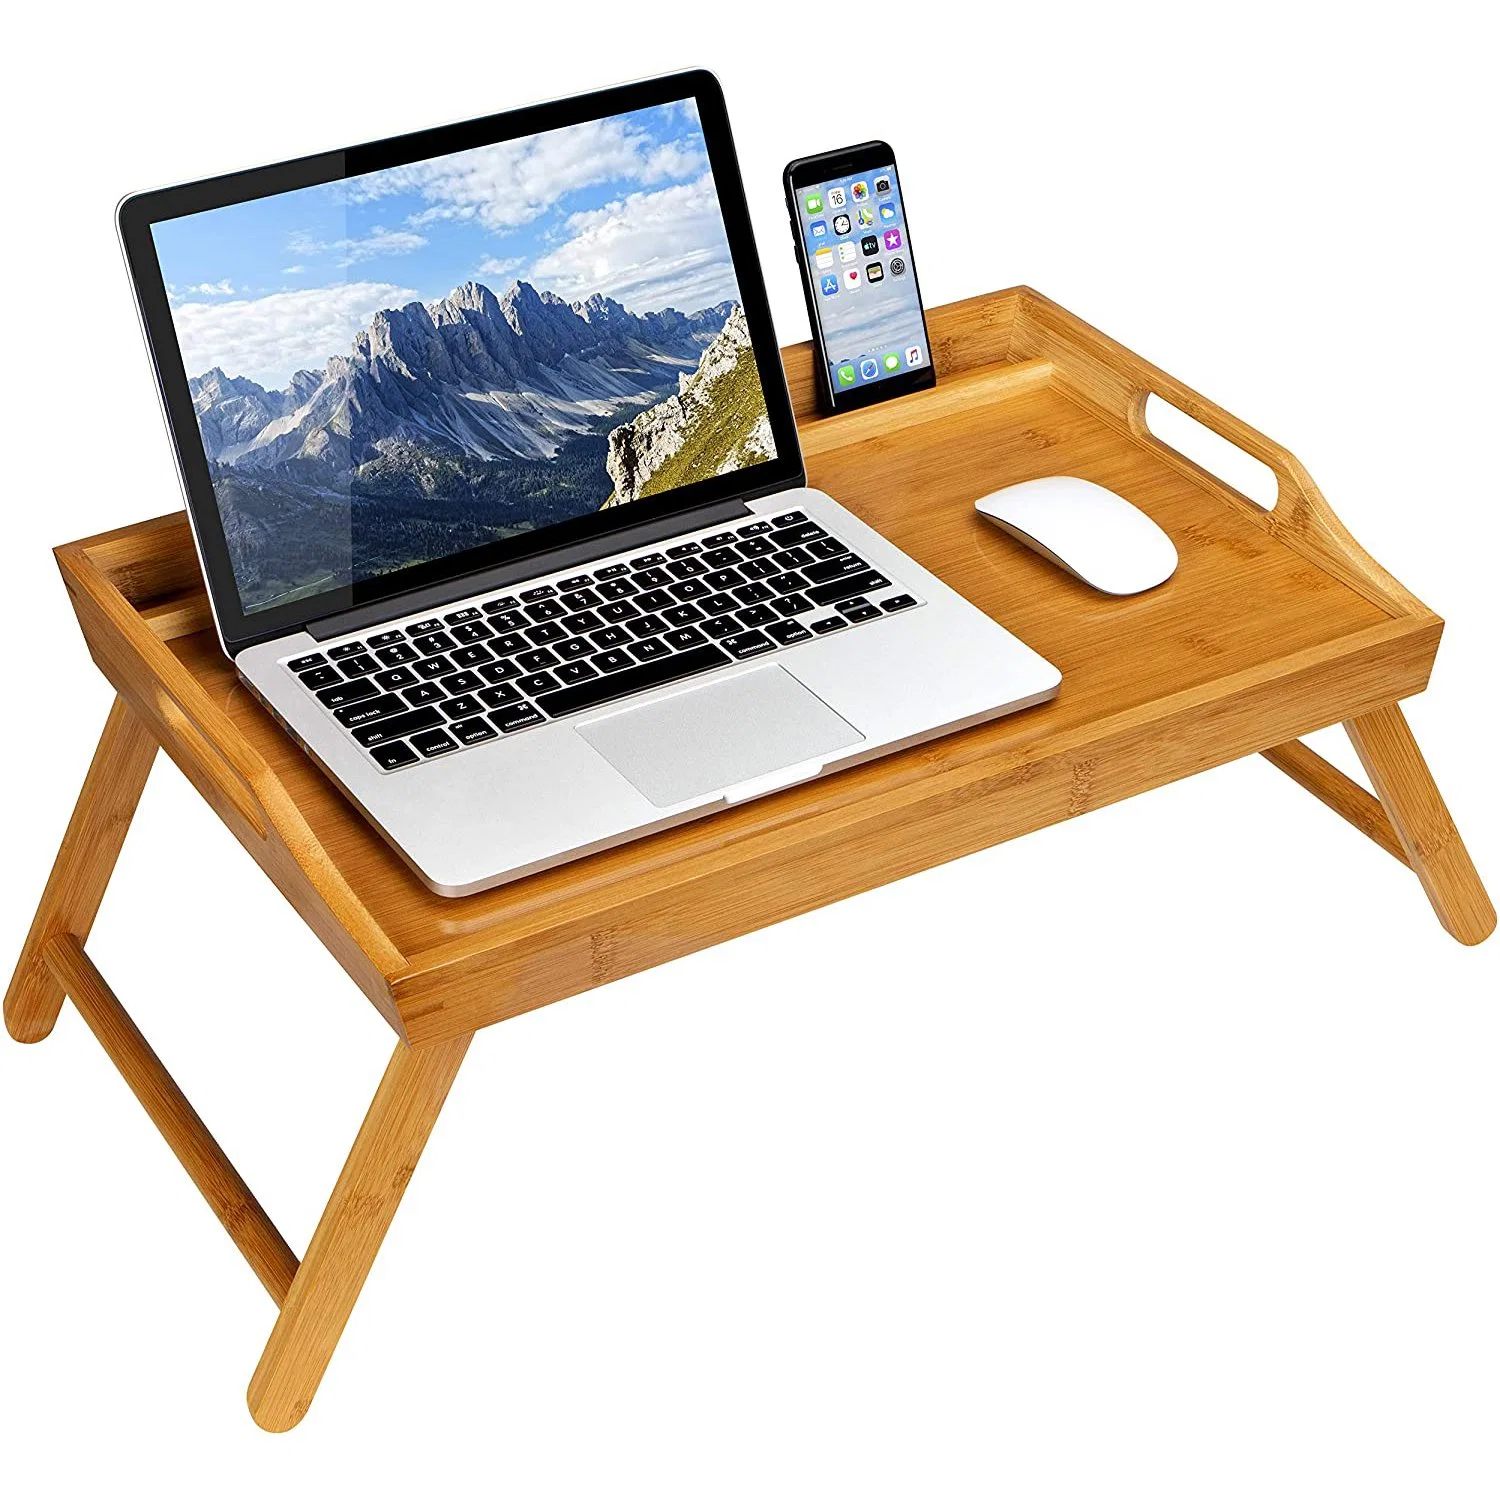 Natural Bamboo Media Bed Folding Tray with Phone Holder Fits up to 17.3 Inch Laptops and Most Tablets